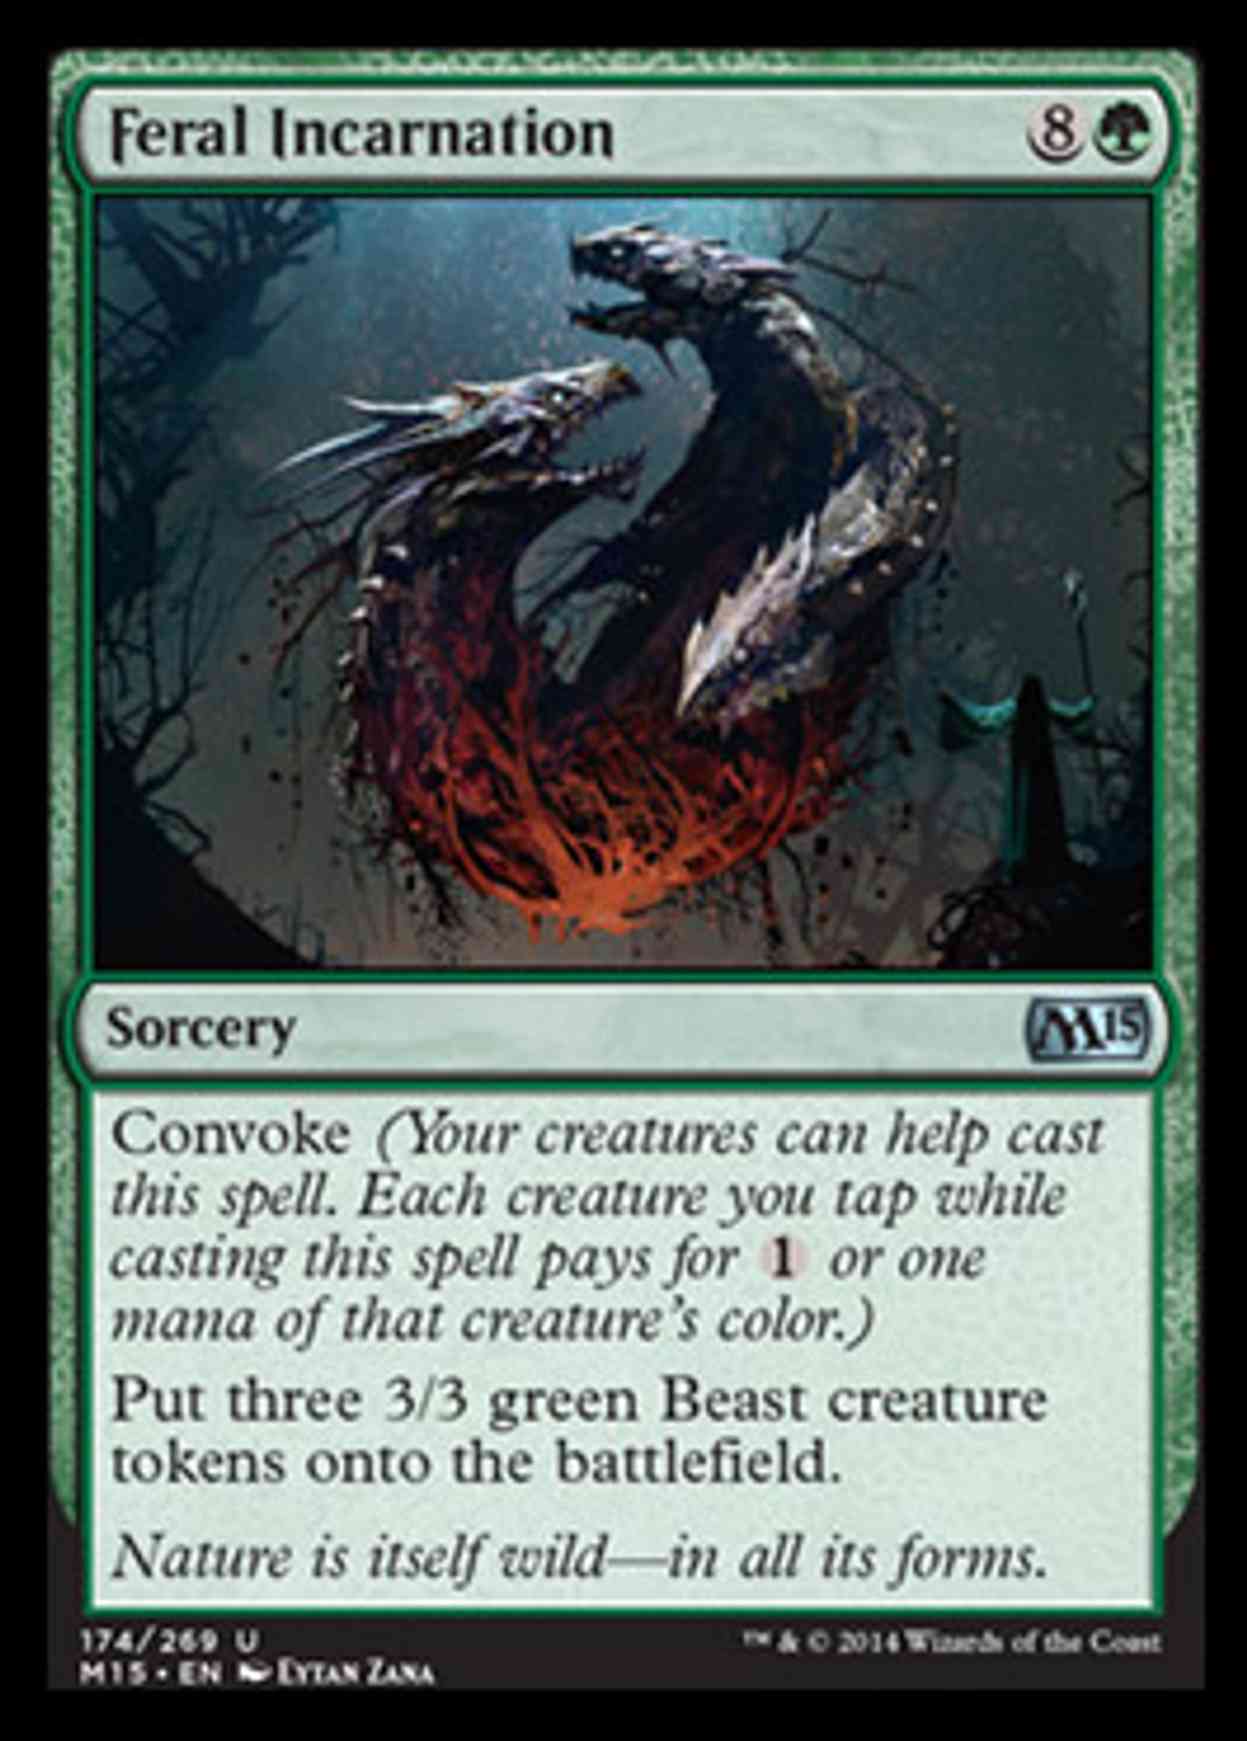 Feral Incarnation magic card front